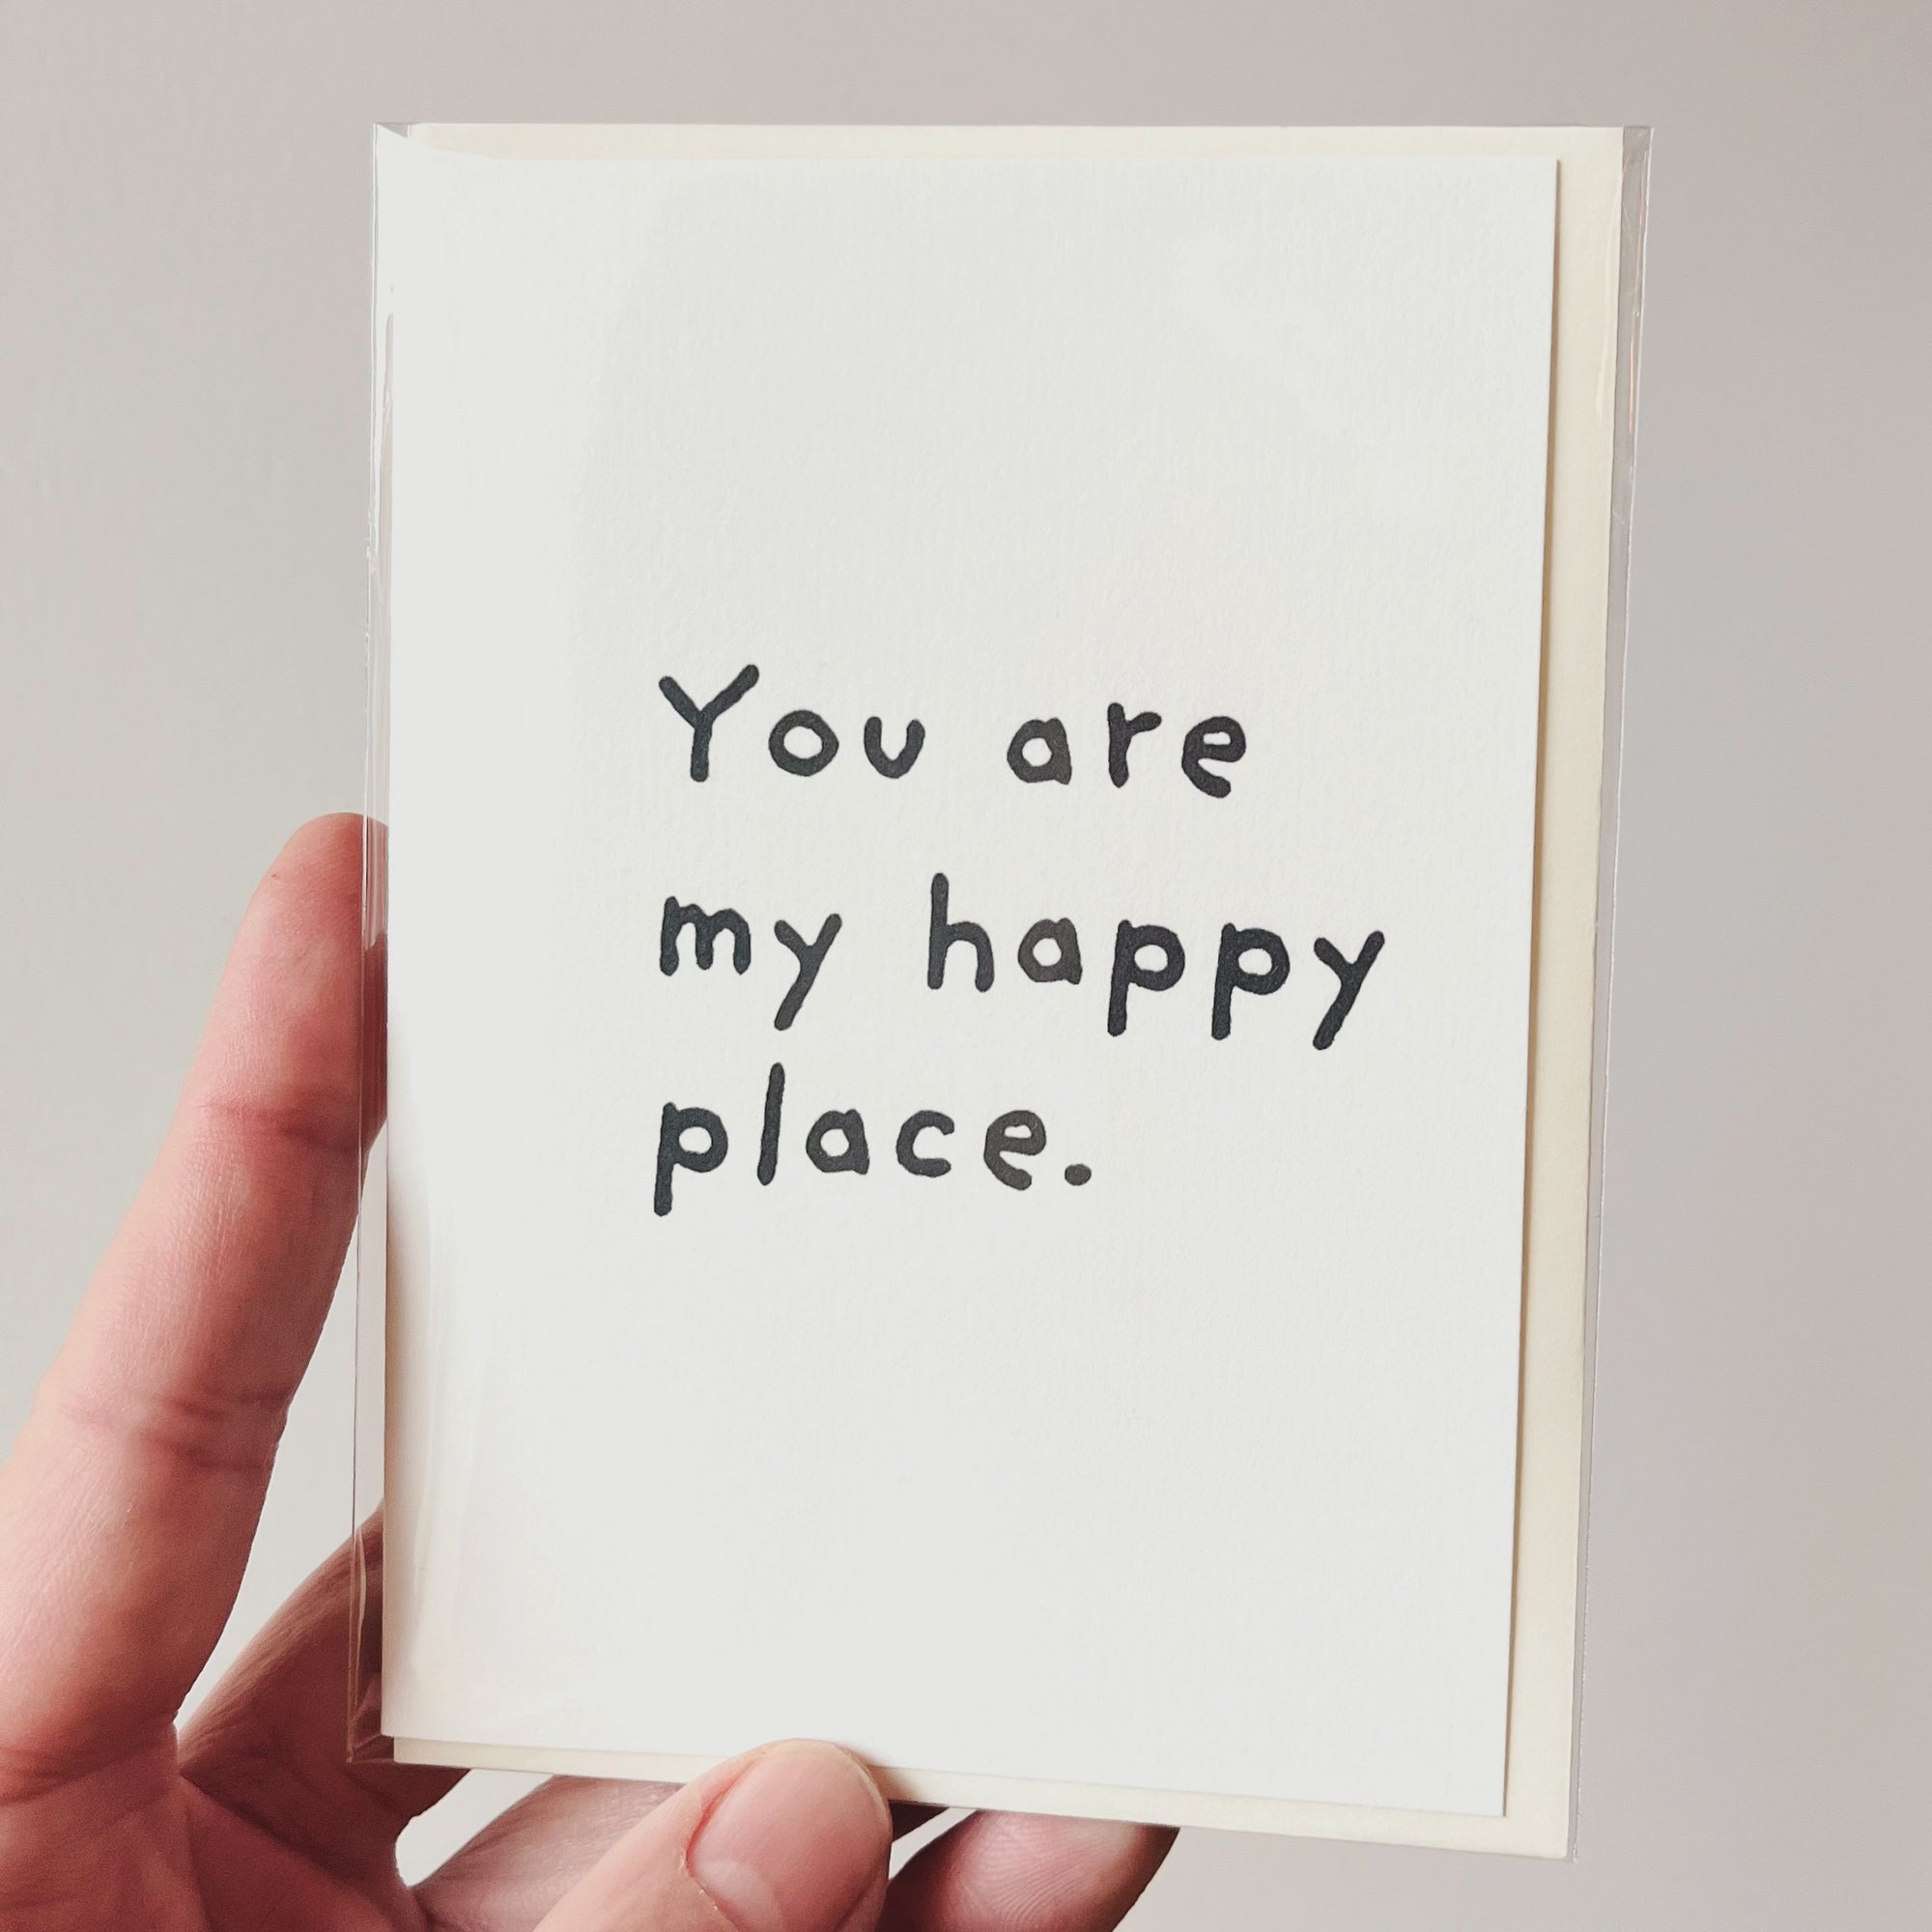 You are my happy place.